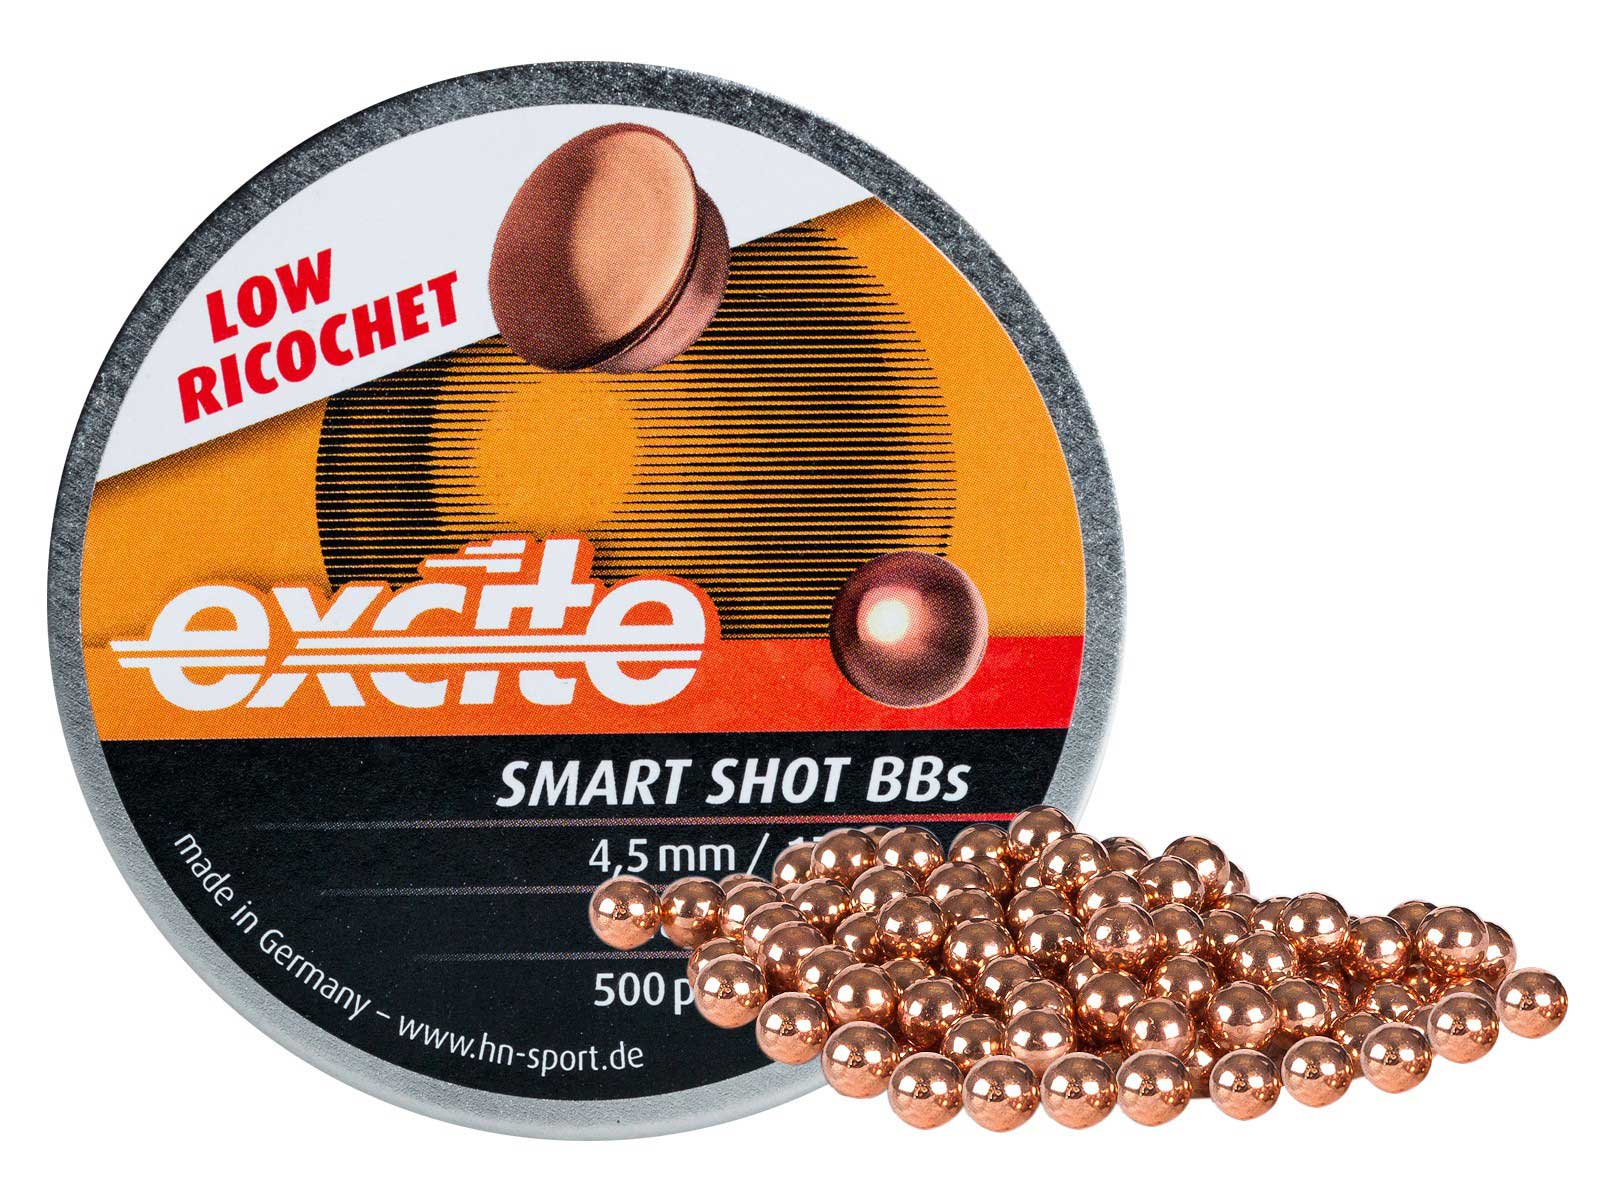 H&N Excite Smart Shot .177 Cal, 7.4 Grains, Copper Plated Lead BBs, 500ct